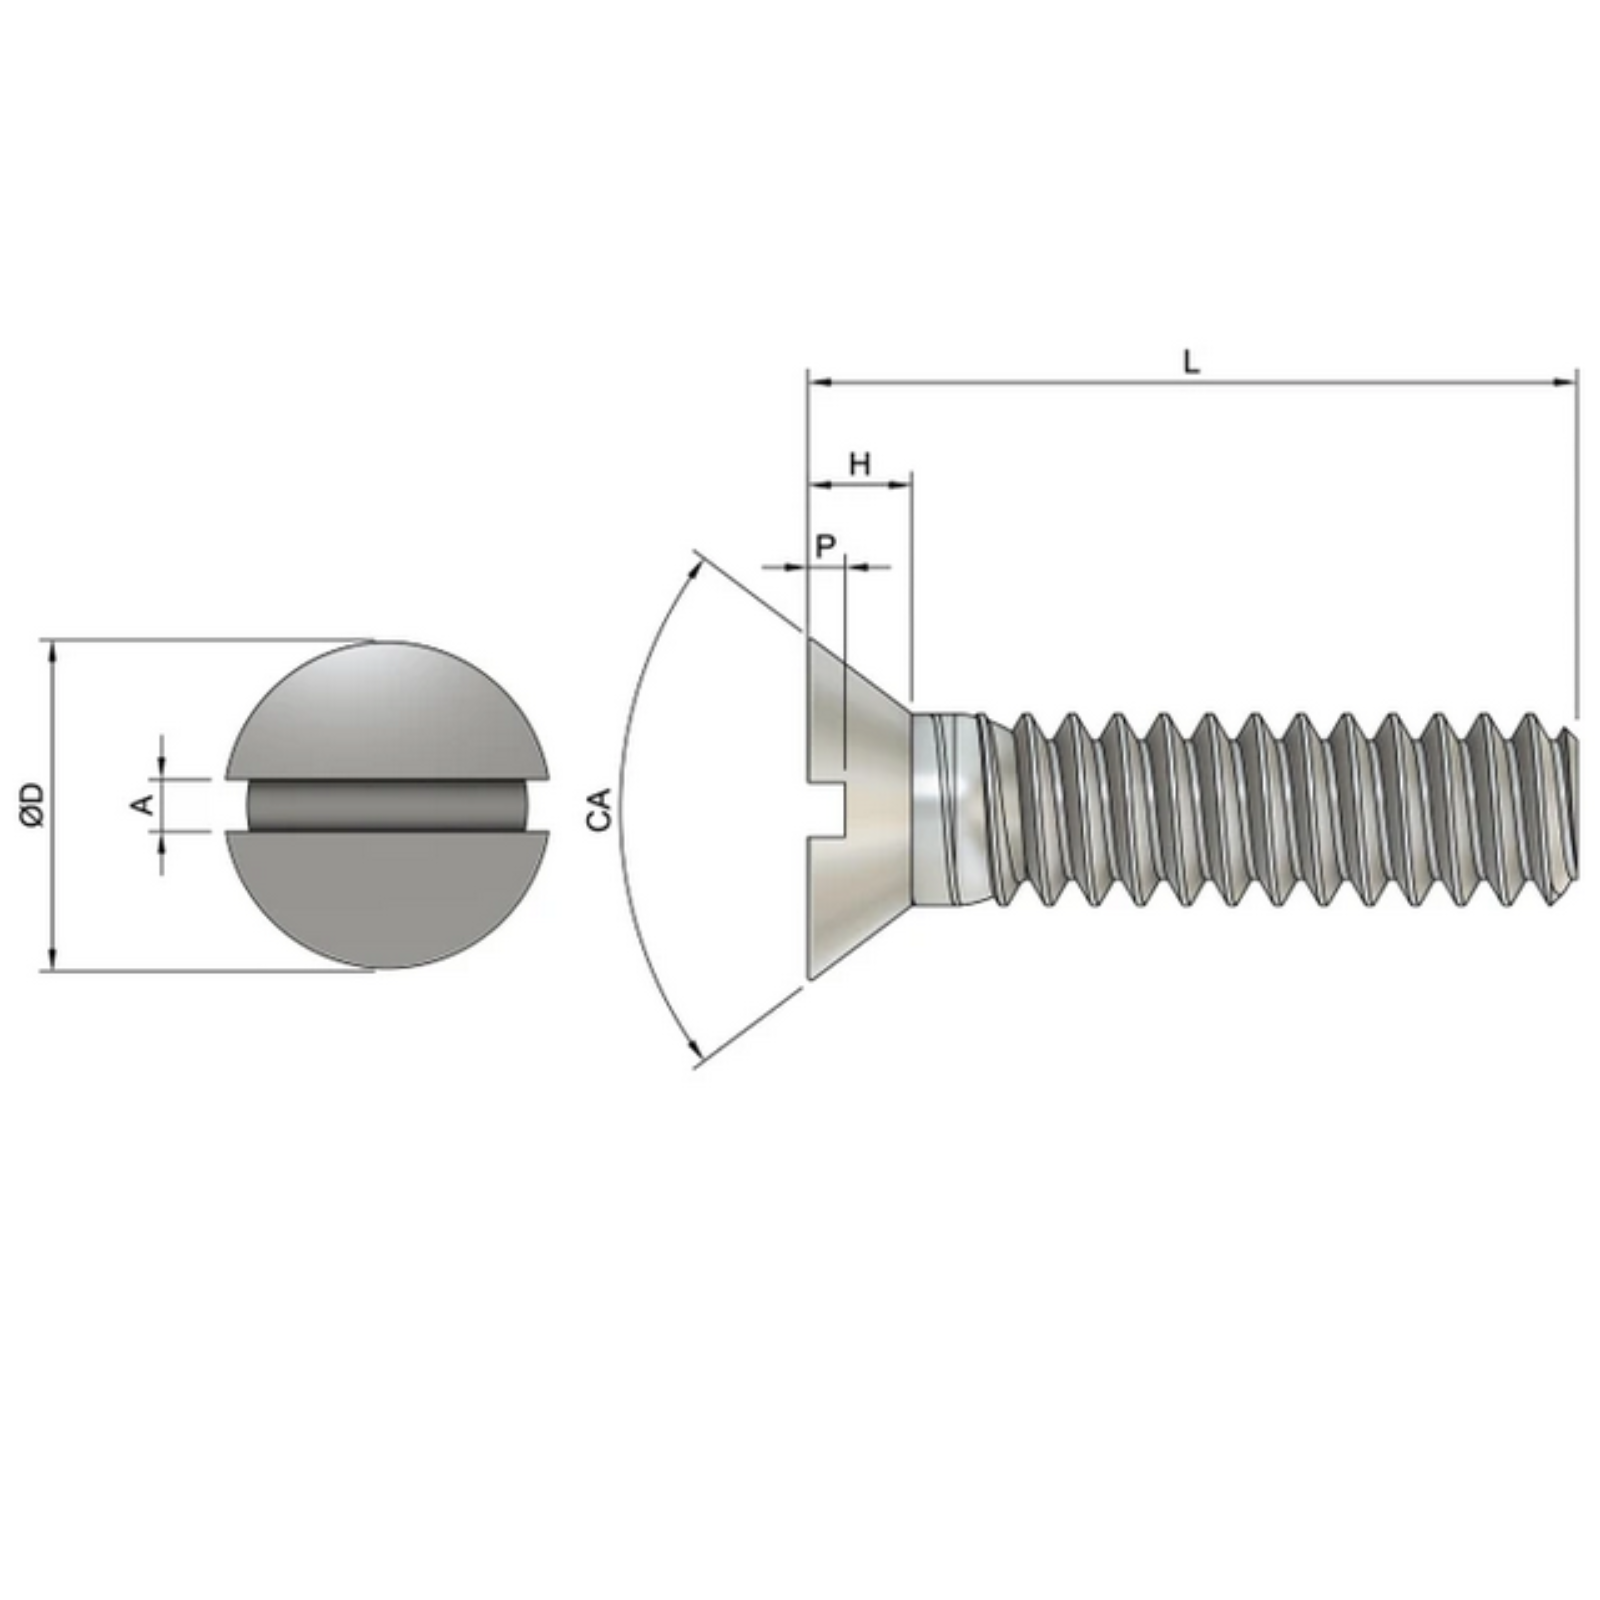 M2 Slotted Countersunk Screws (DIN 963) - Stainless Steel (A2)